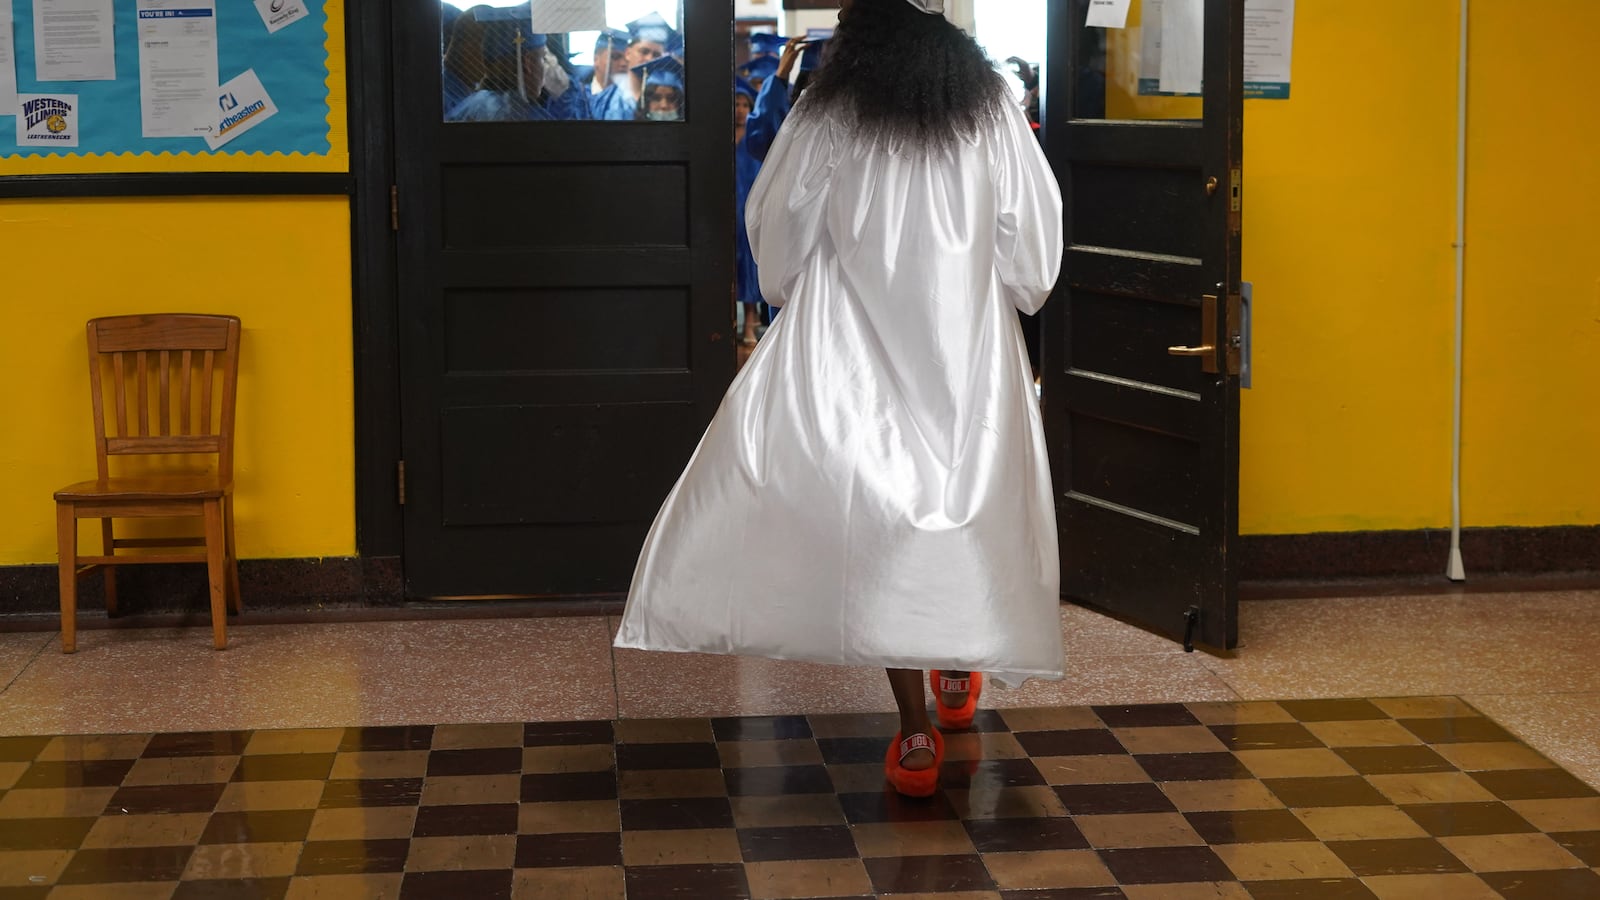 A student walks through a doorway in a white graduation cap and gown.